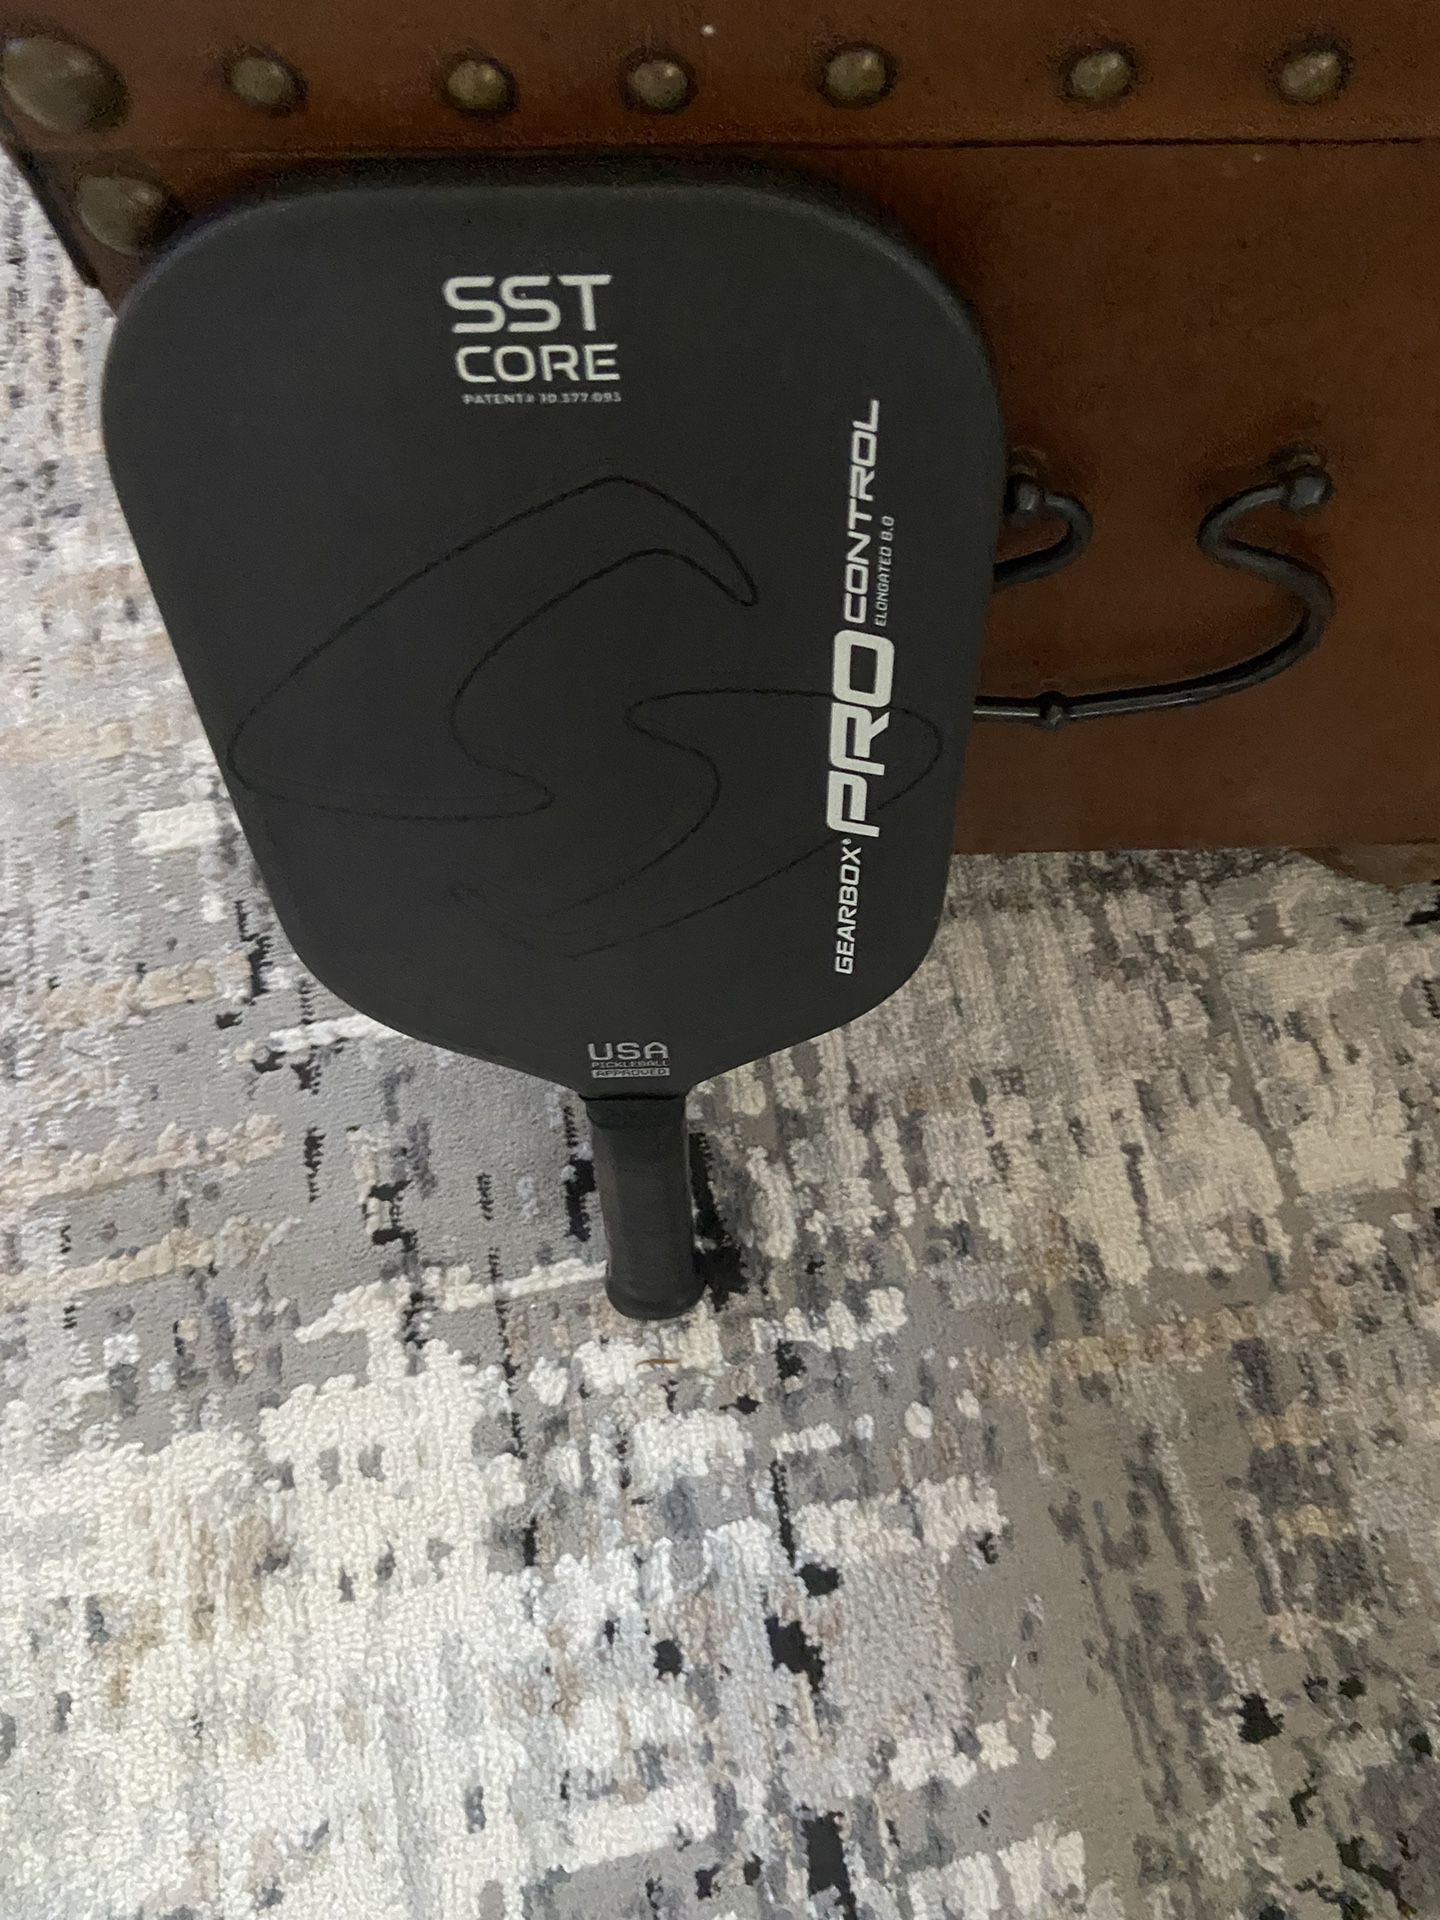 Gearbox Pro Control SST CORE Pickelball Paddle